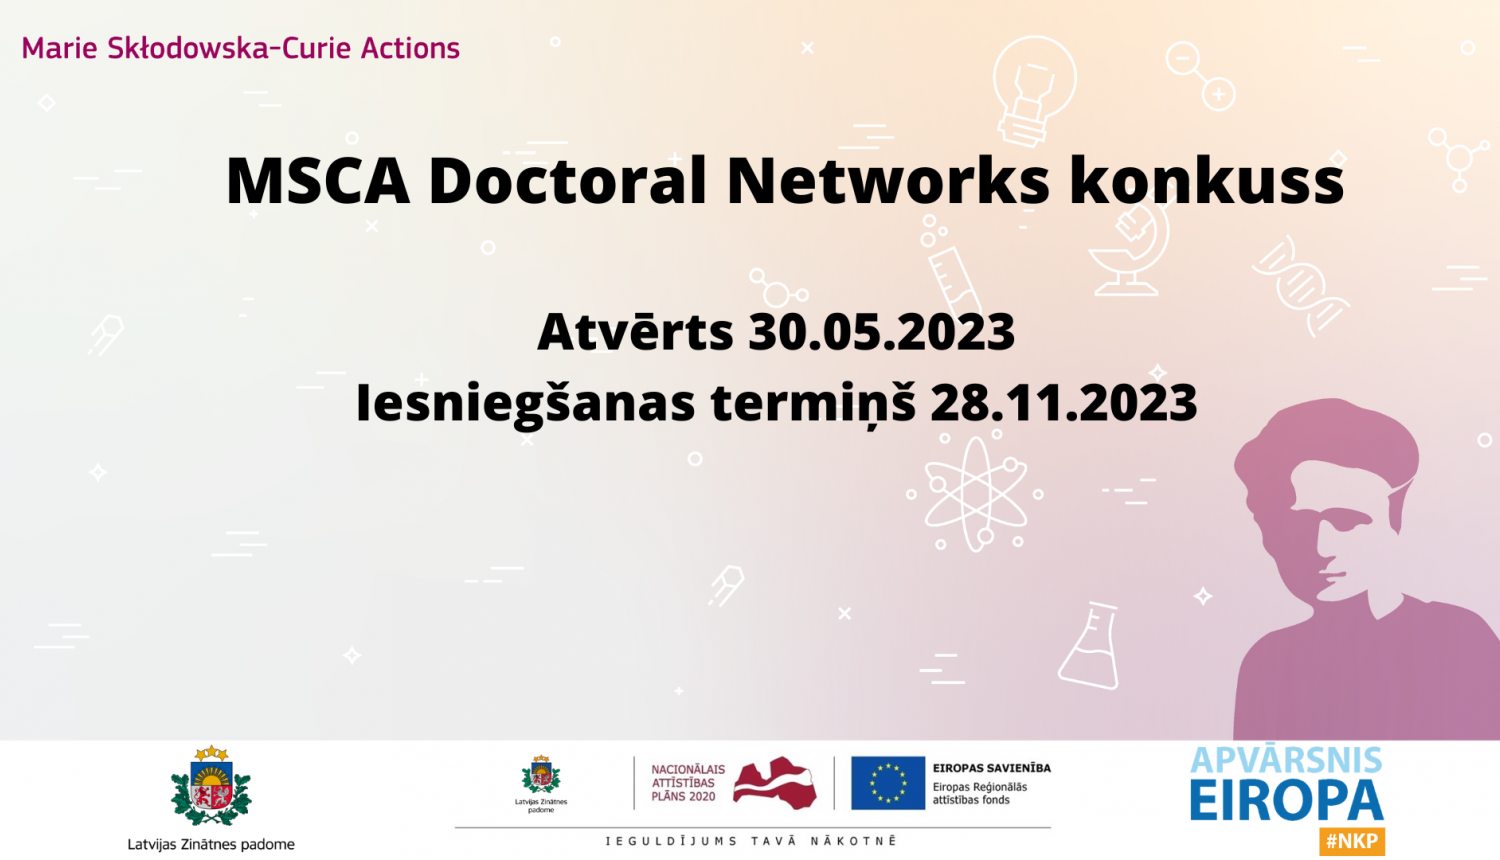 Opens MSCA competition for doctoral networking